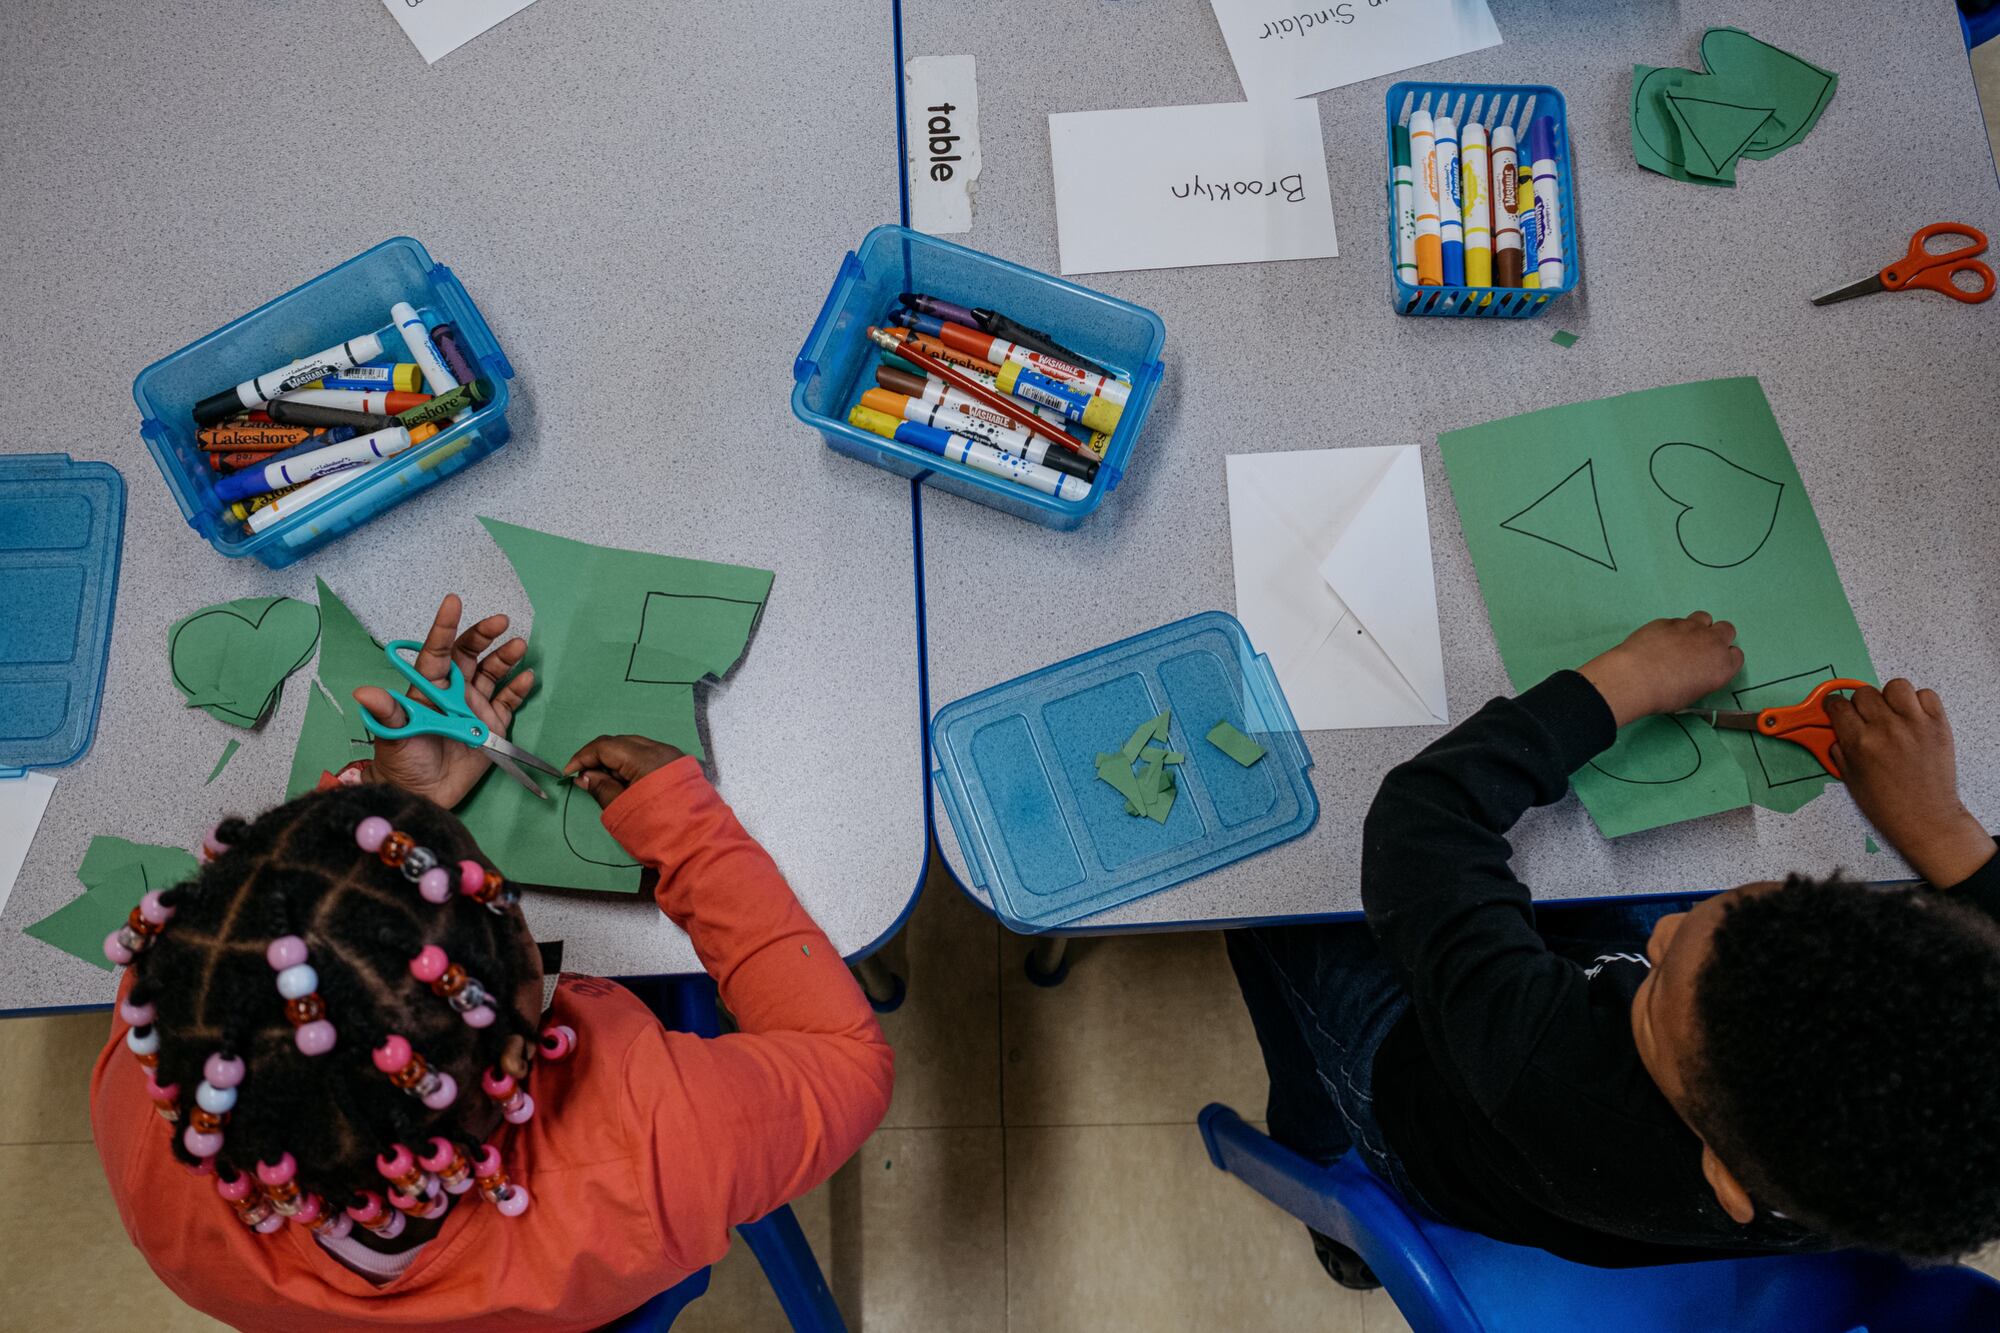 A bird's eye view of two young students sitting at a table cutting out shapes from construction paper.